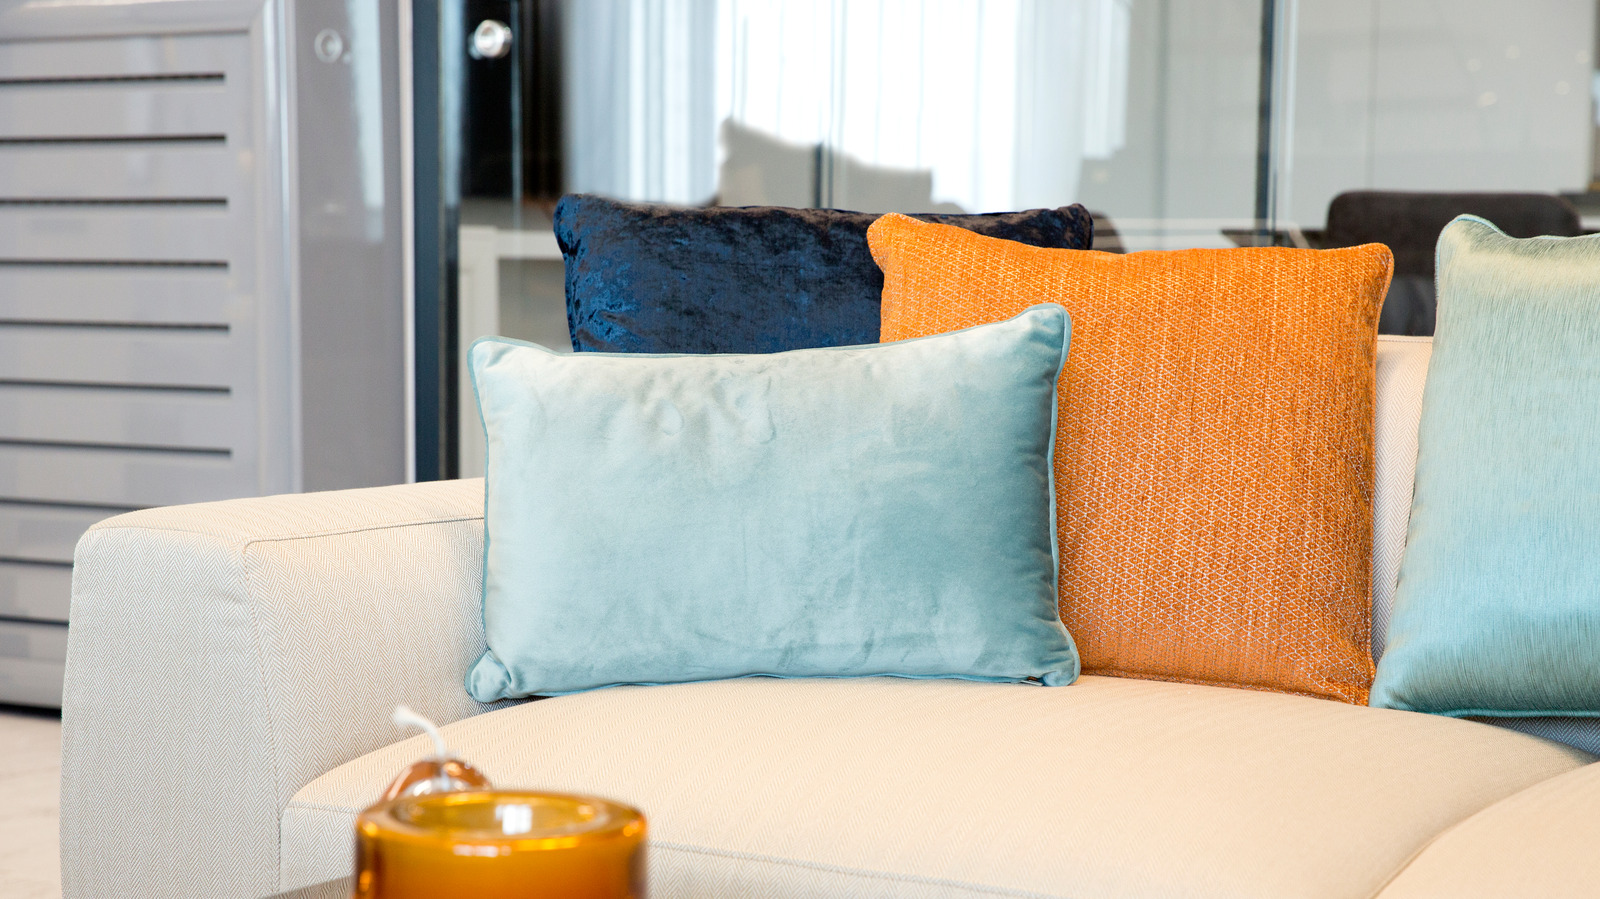 https://www.housedigest.com/img/gallery/is-there-such-a-thing-as-having-too-many-pillows-on-a-couch/l-intro-1656036163.jpg